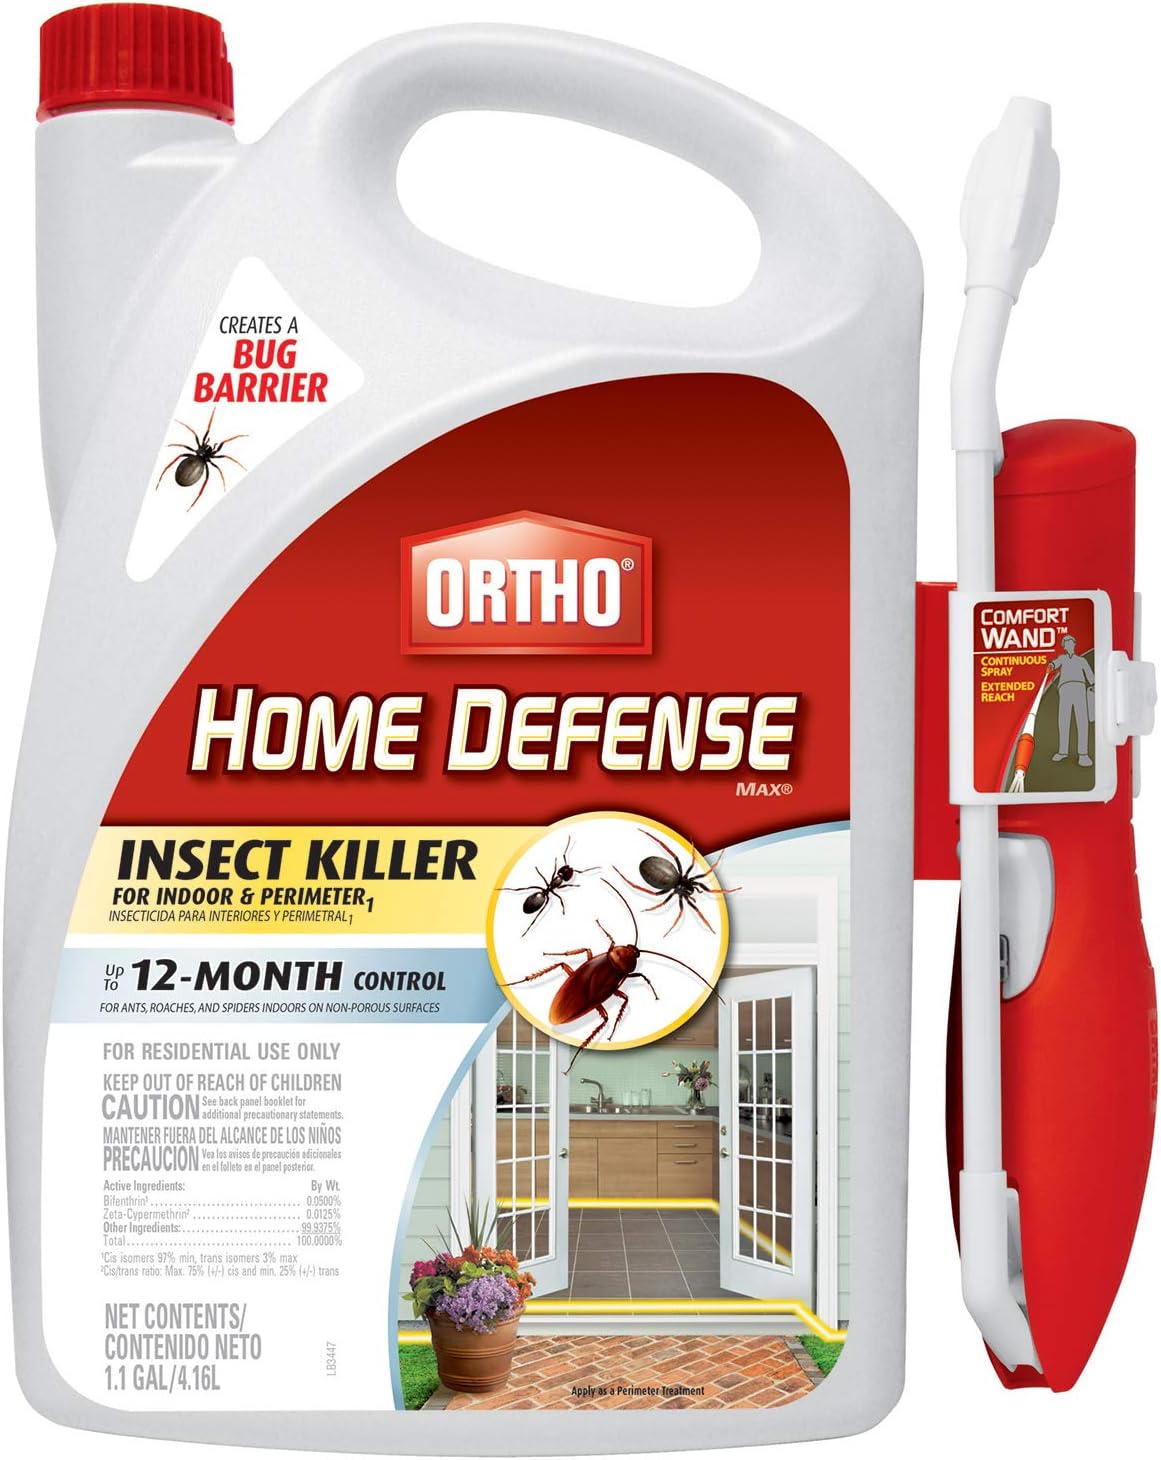 Ortho Home Defense MAX Insect Killer for Indoor & [...]